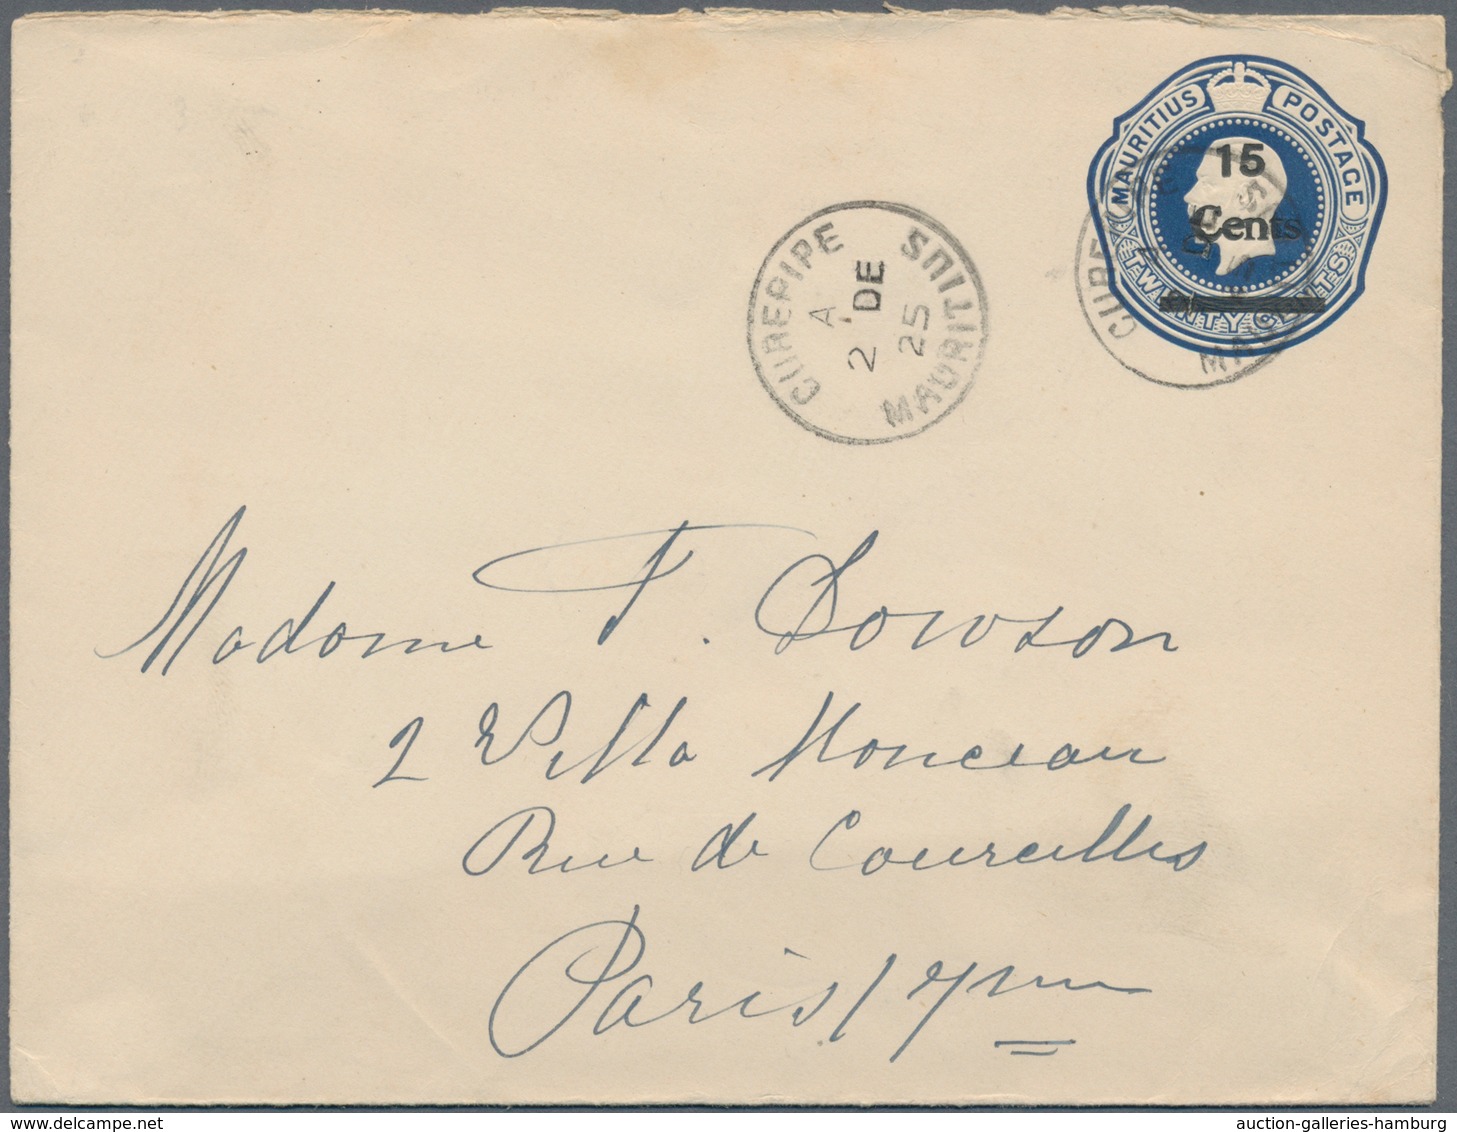 Mauritius: 1925. King George V 20c Blue Envelope Overprinted 15 Cents In Black Cancelled Curepipe A - Mauritius (...-1967)